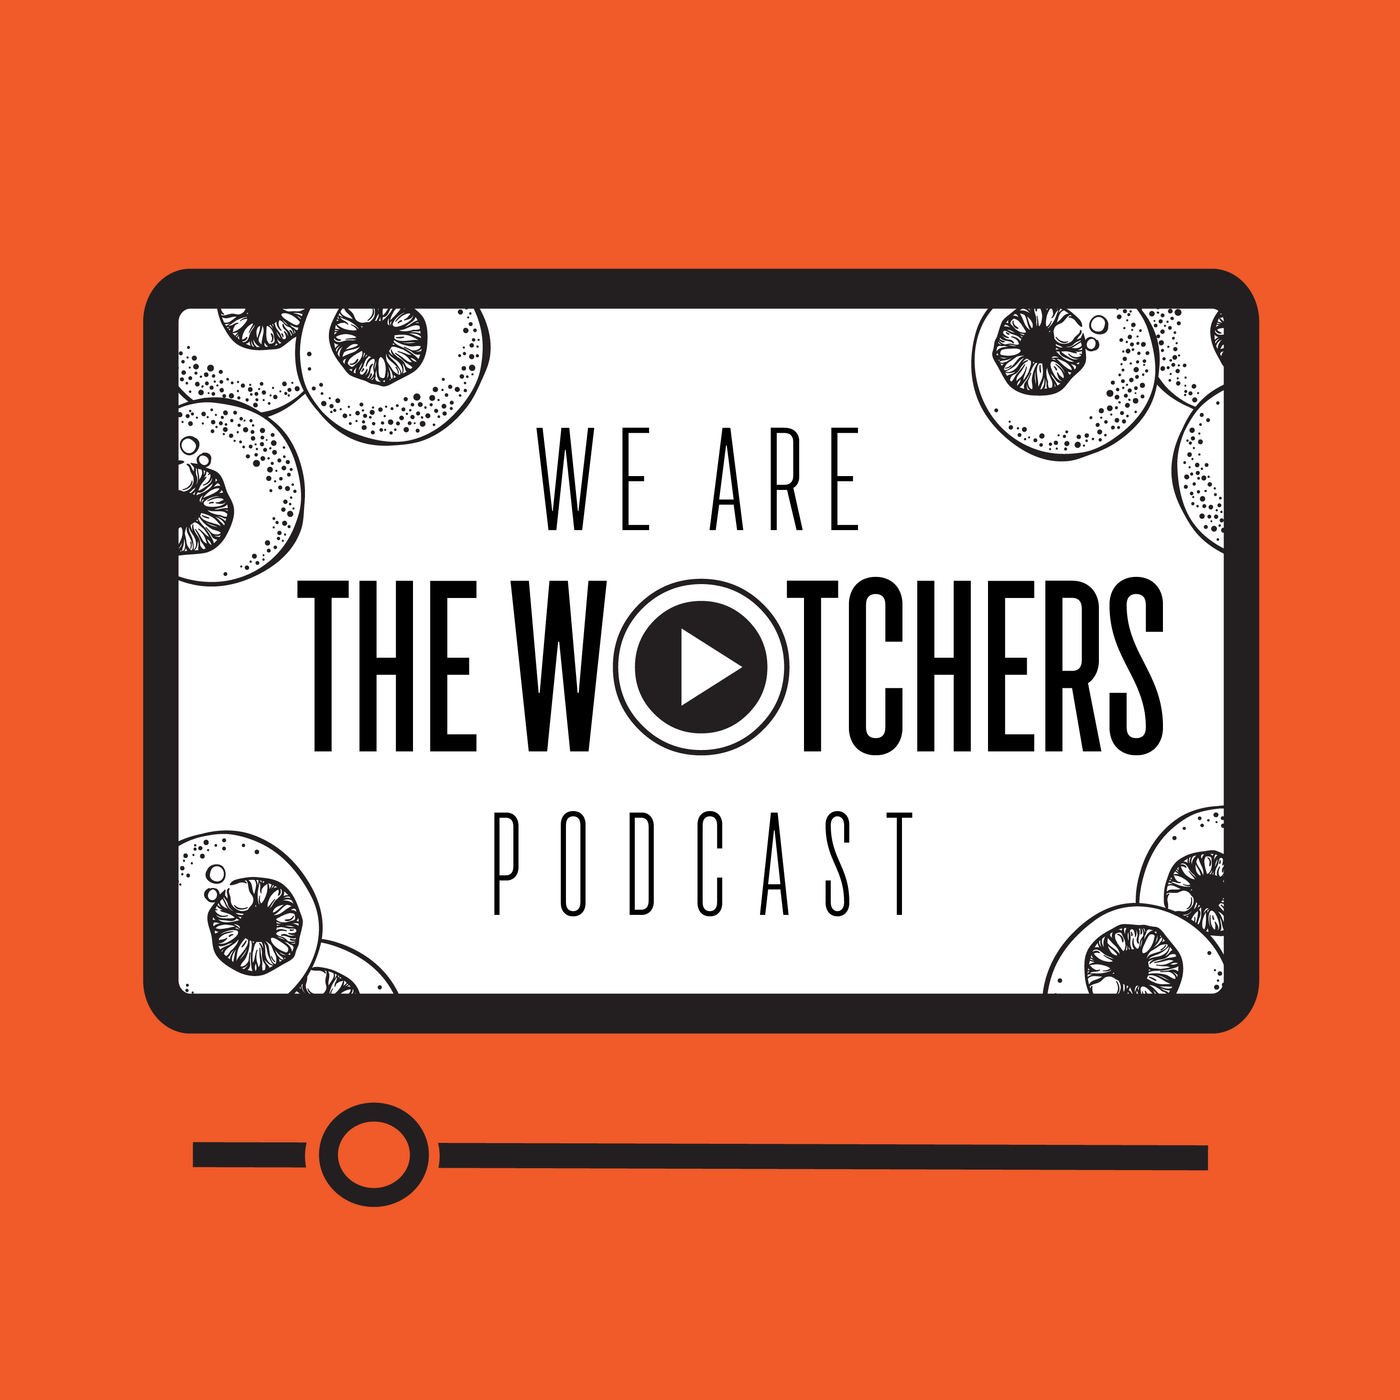 We Are The Watcher Episode 57 The Christmas Questions